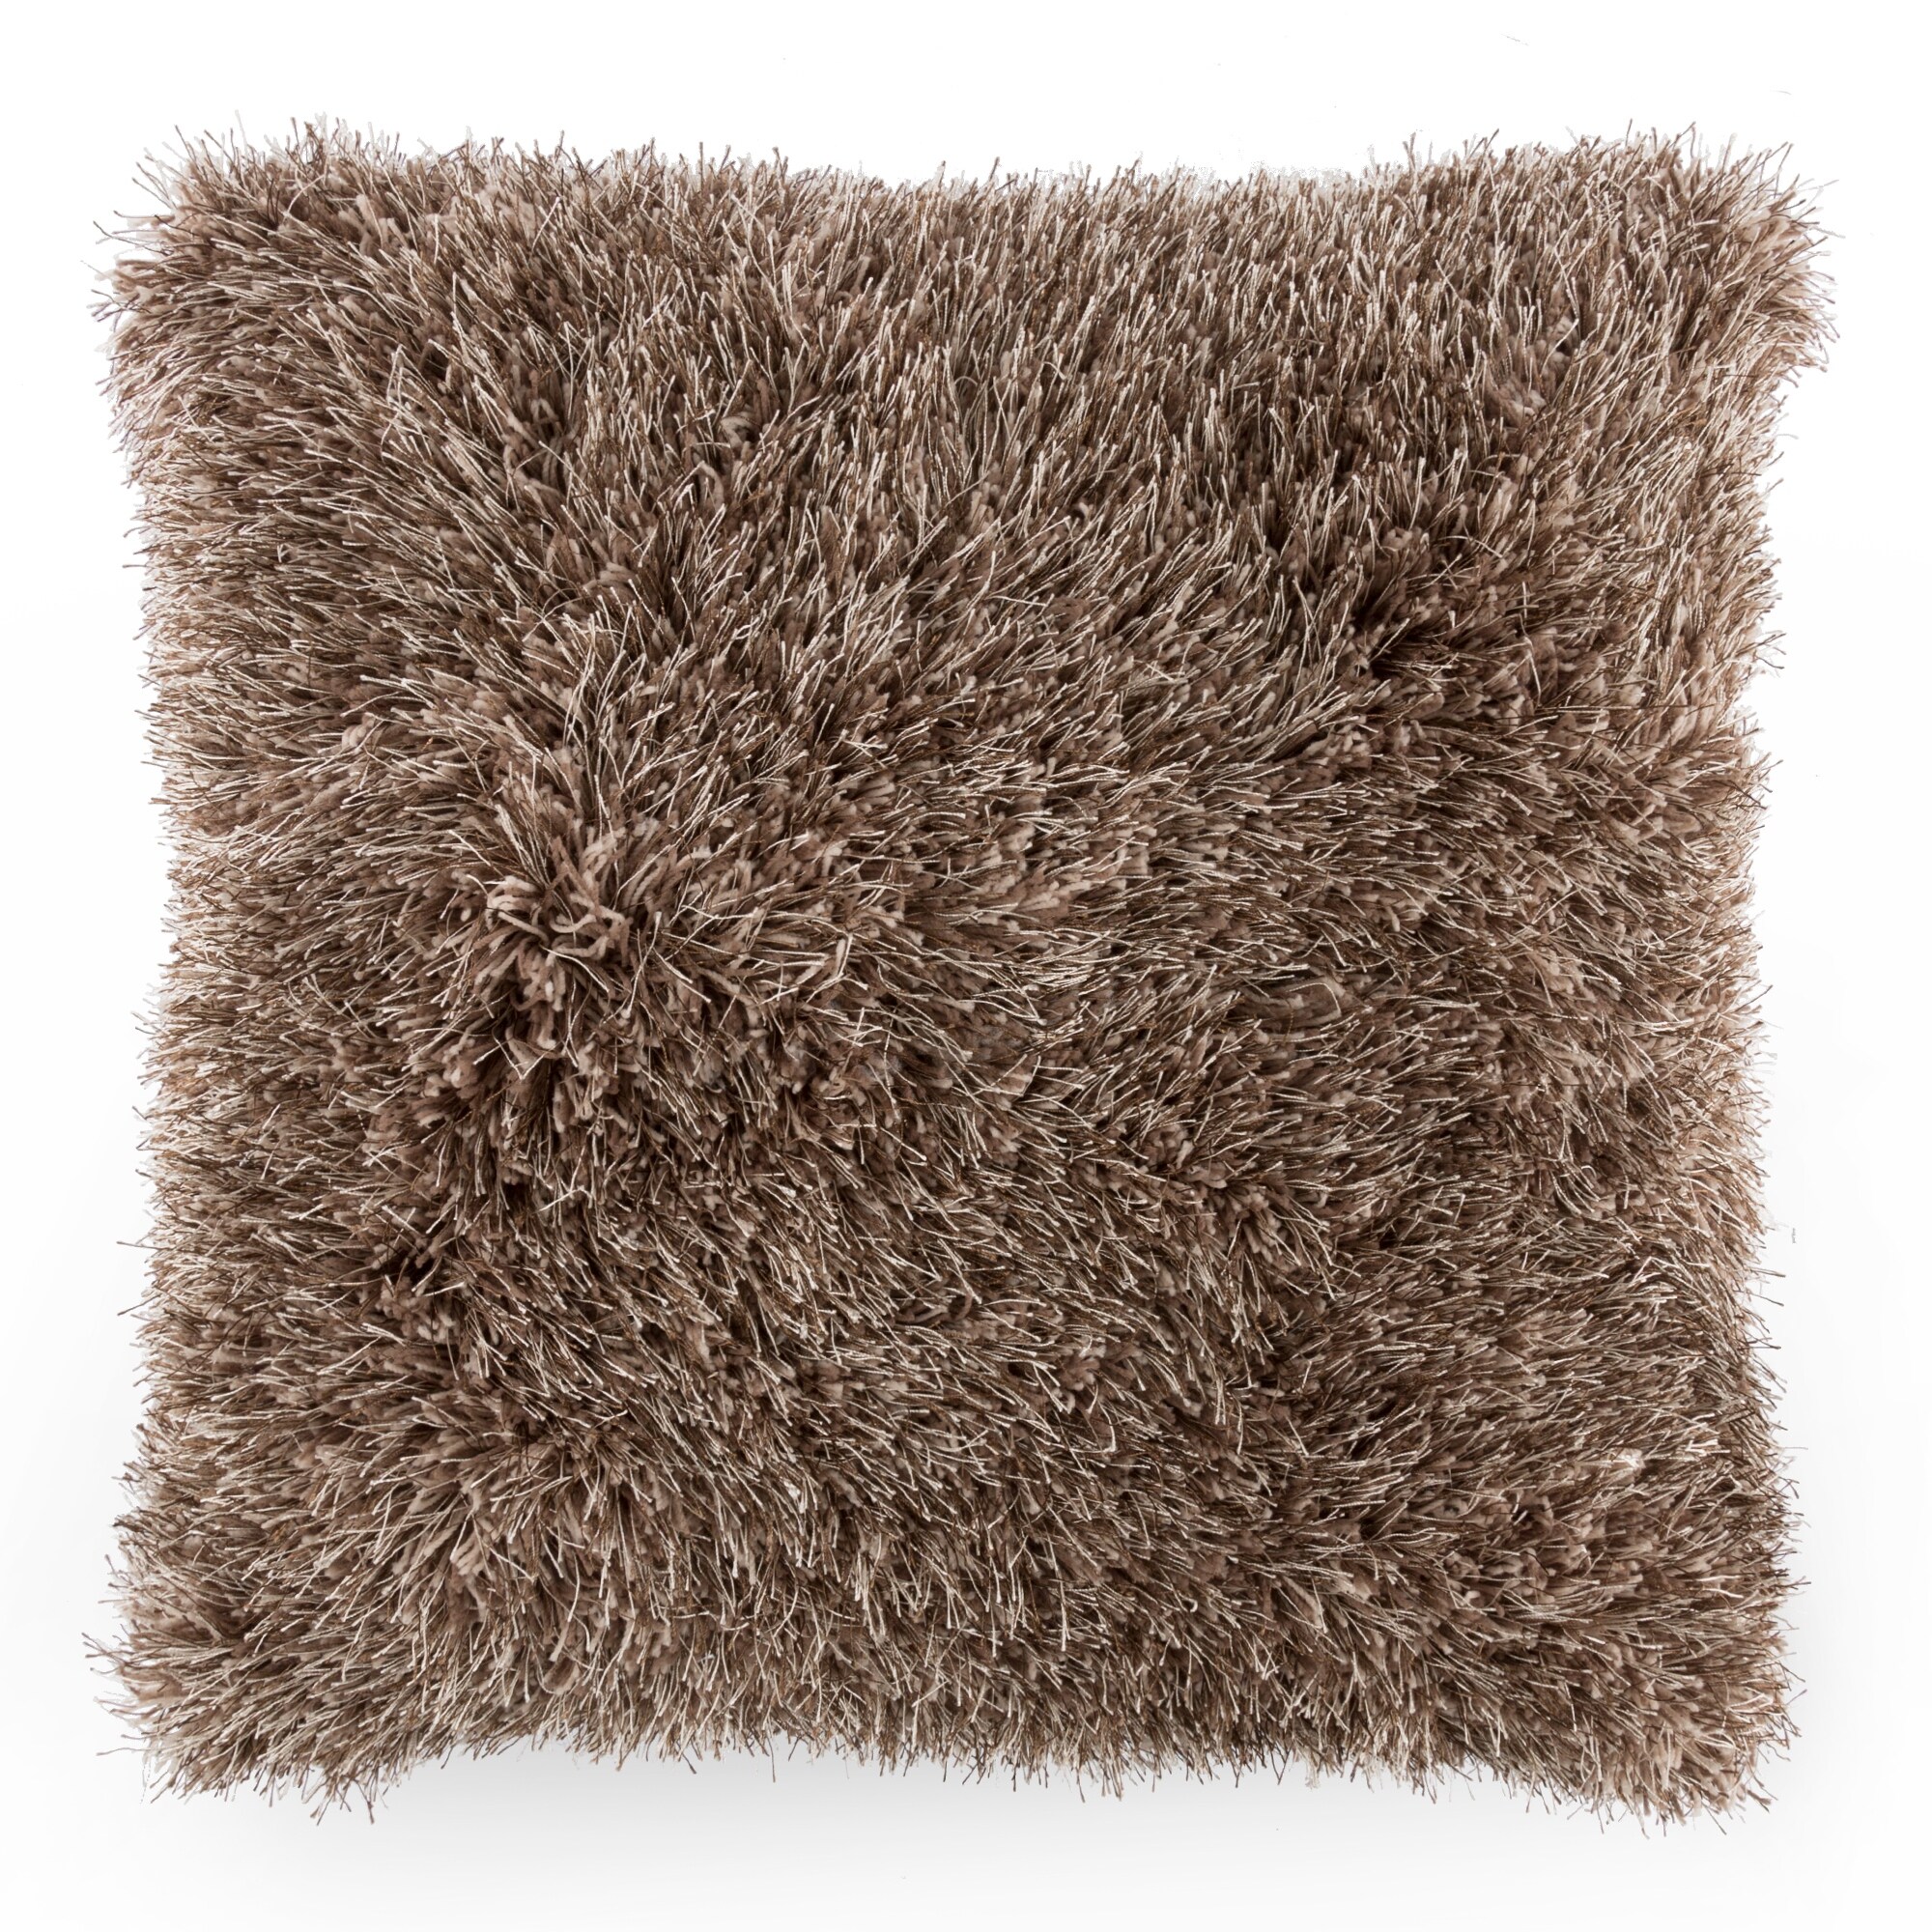 https://ak1.ostkcdn.com/images/products/is/images/direct/75cc1288dc26a4190dbfc974fb2a459b4d7d7c2e/Oversized-Floor-or-Throw-Pillow-Square-Shag-FauxFur-by-Windsor-Home.jpg